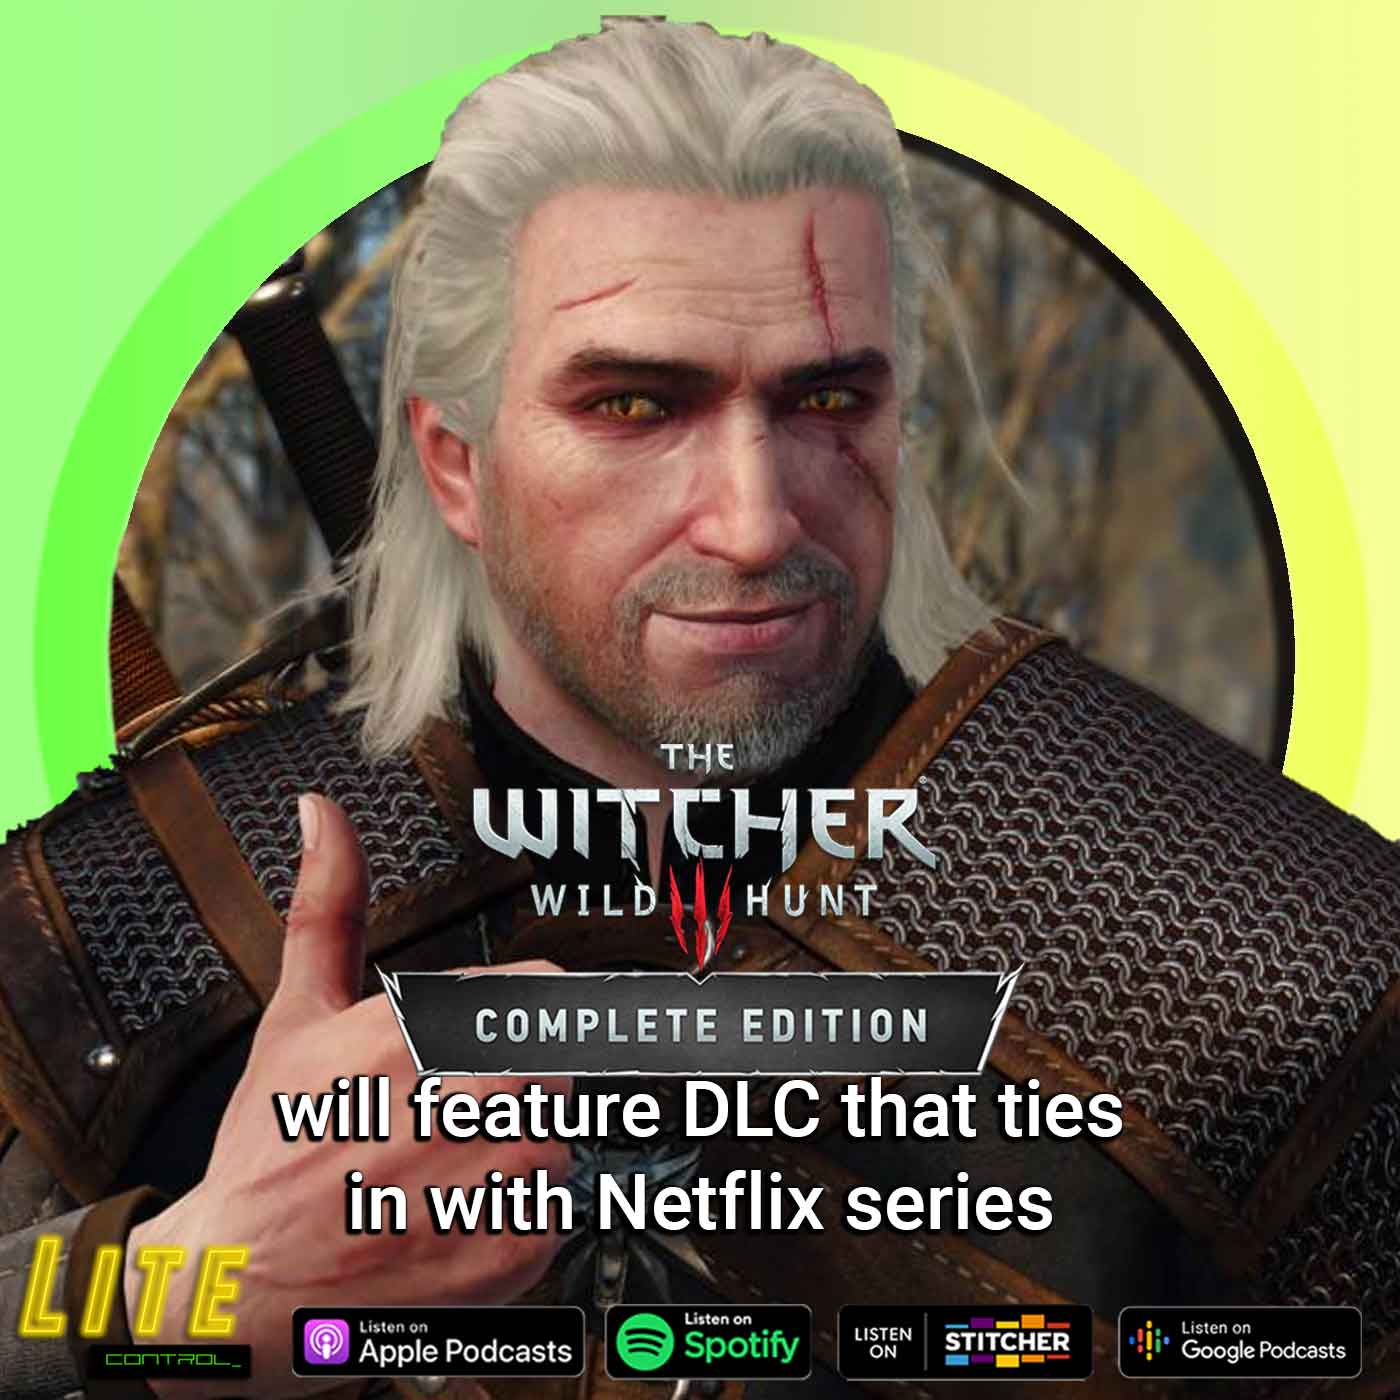 Lite Control 141 - Witcher Series-related DLC Coming to Witcher 3 Wild Hunt Next Gen Versions